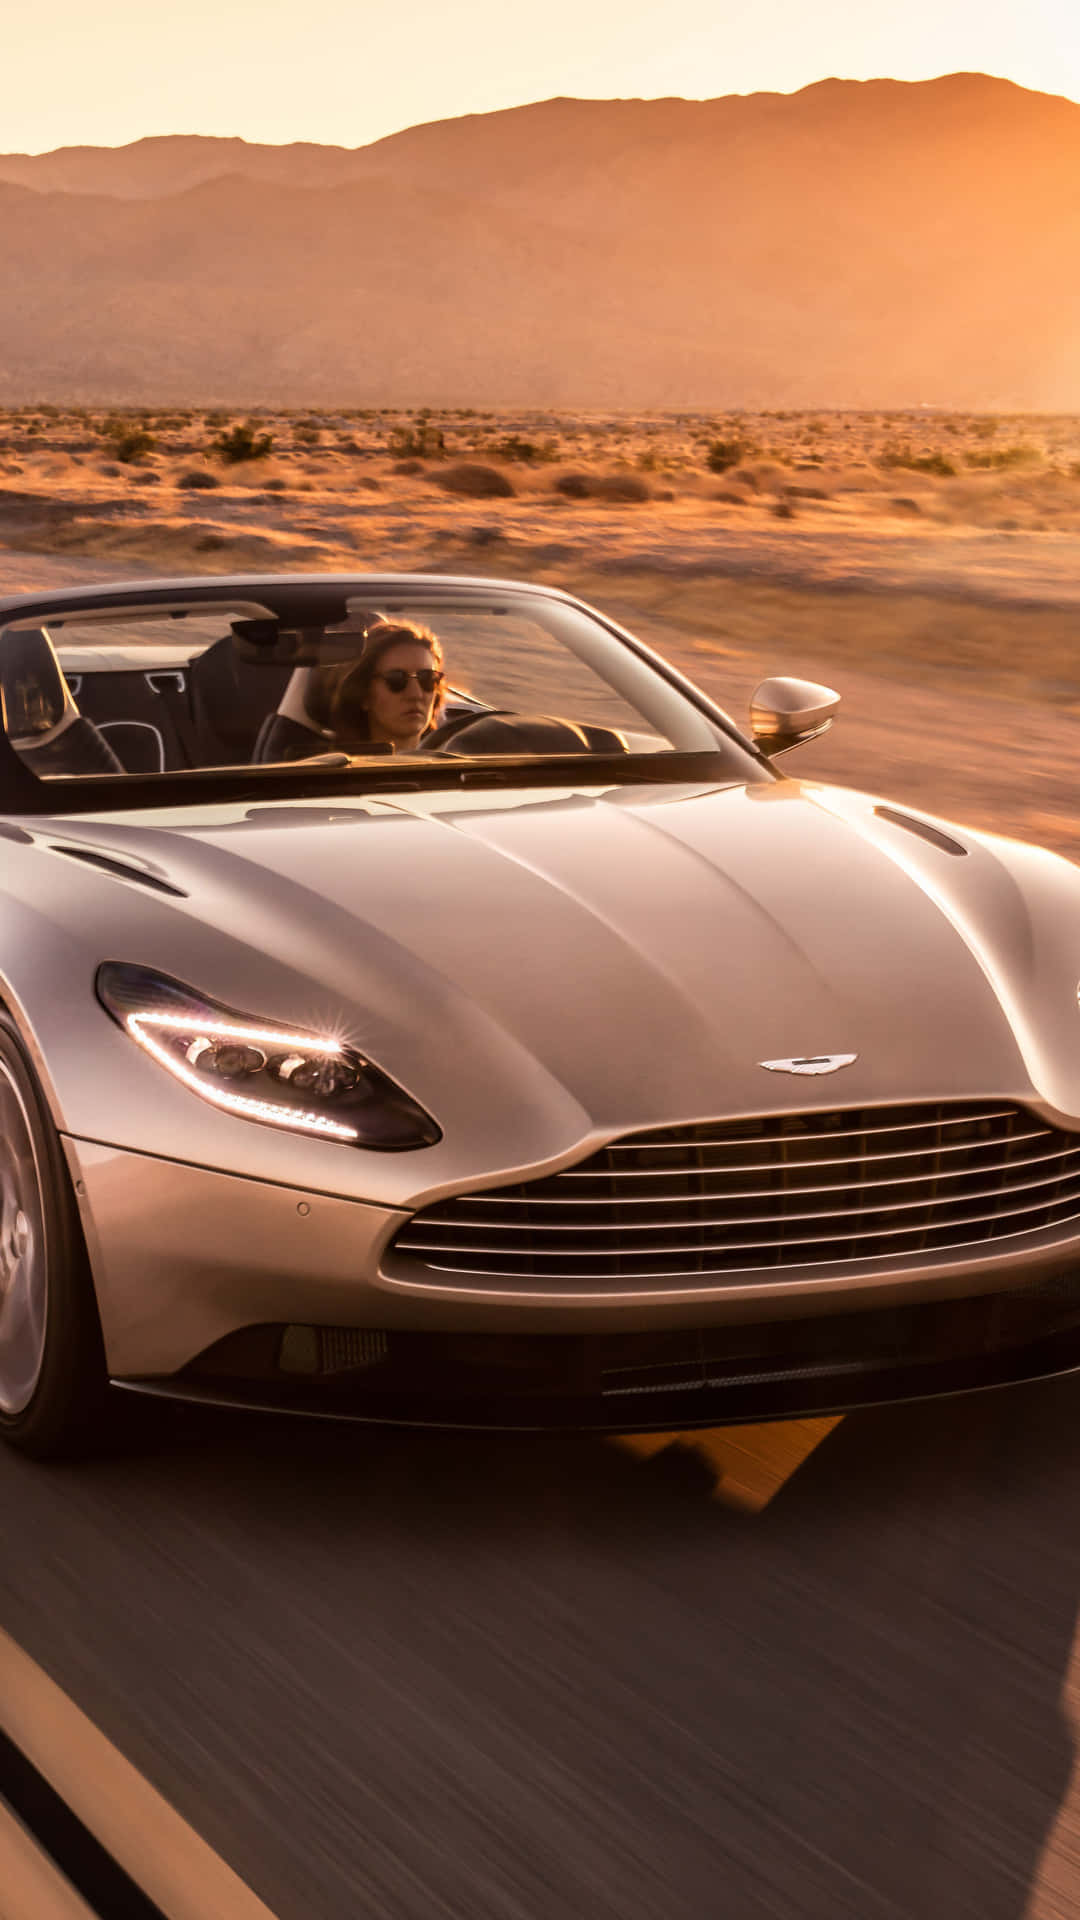 Aston Martin DB11 - The Epitome of Power and Style Wallpaper